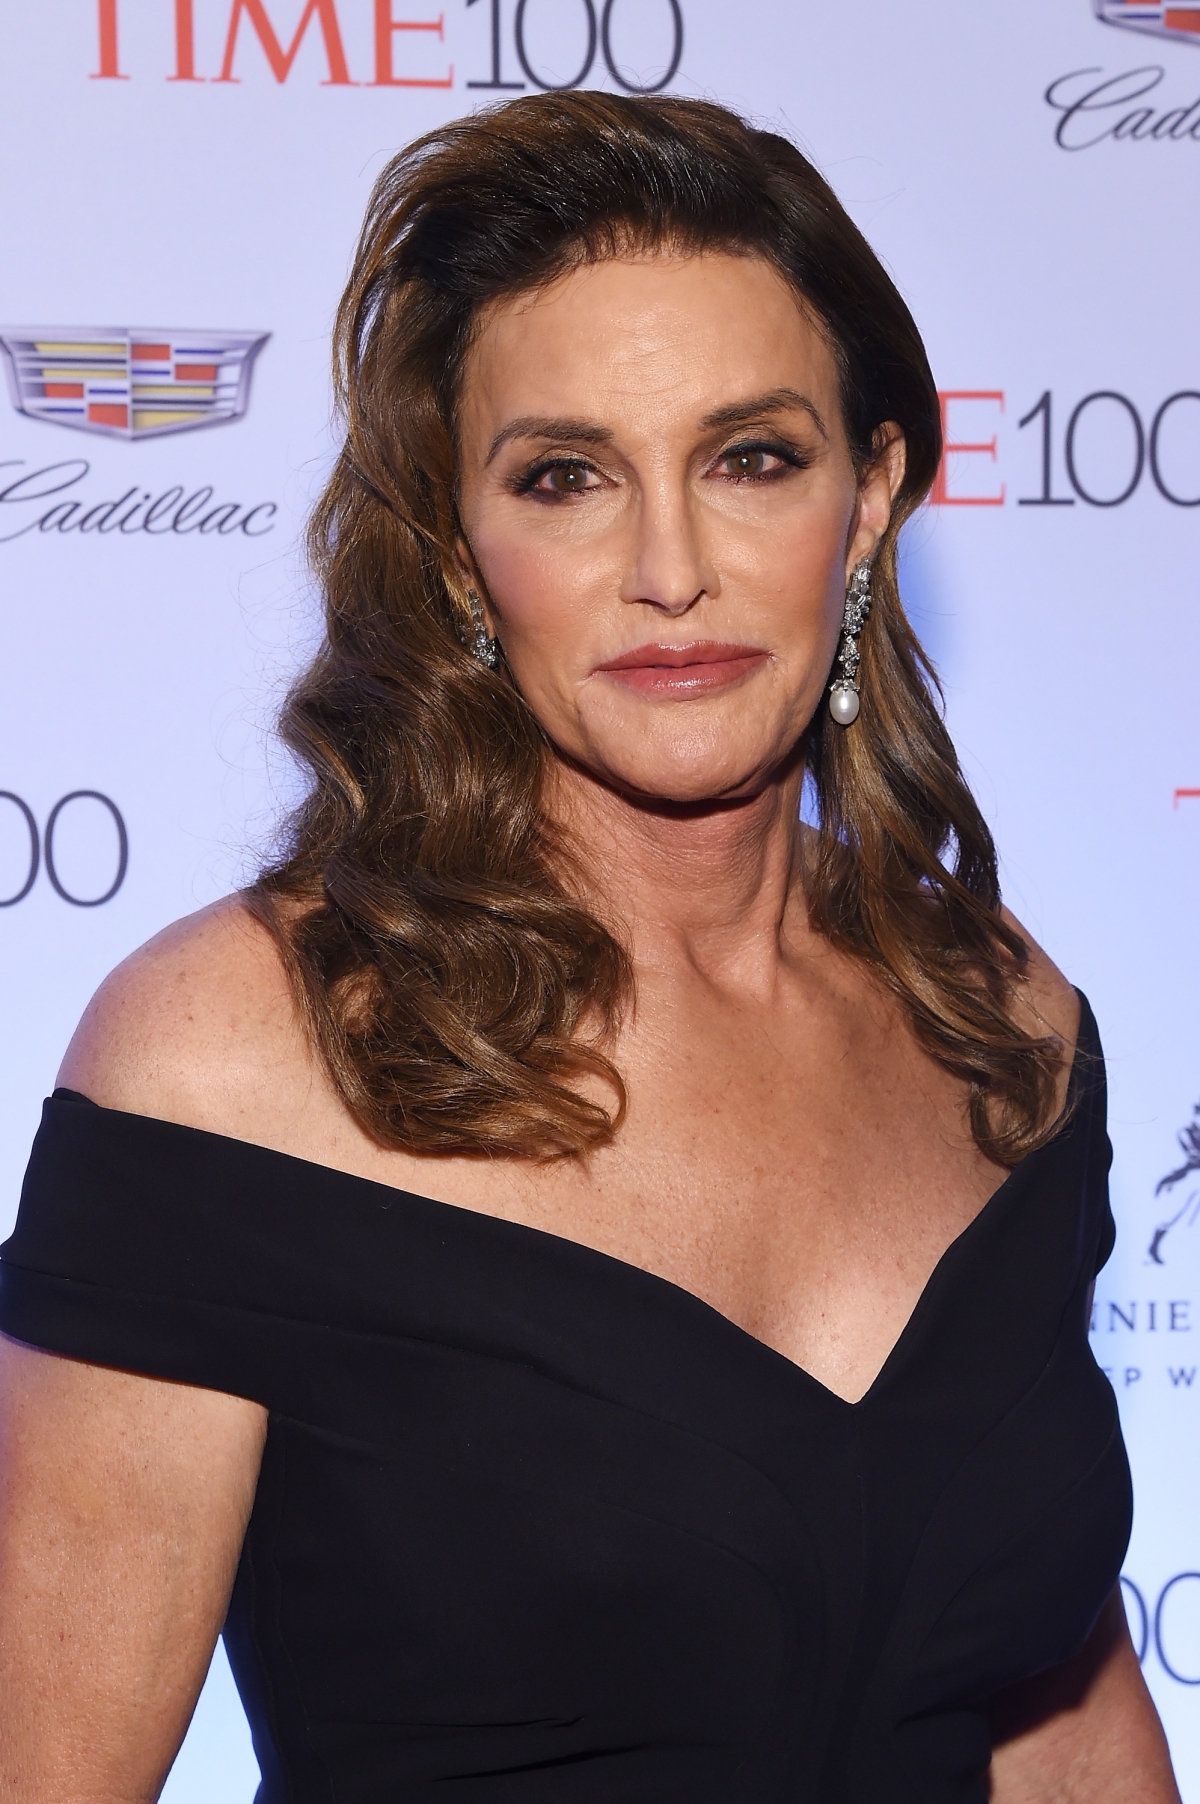 Kellie Maloney tells Caitlyn Jenner to stop competing with Kardashian